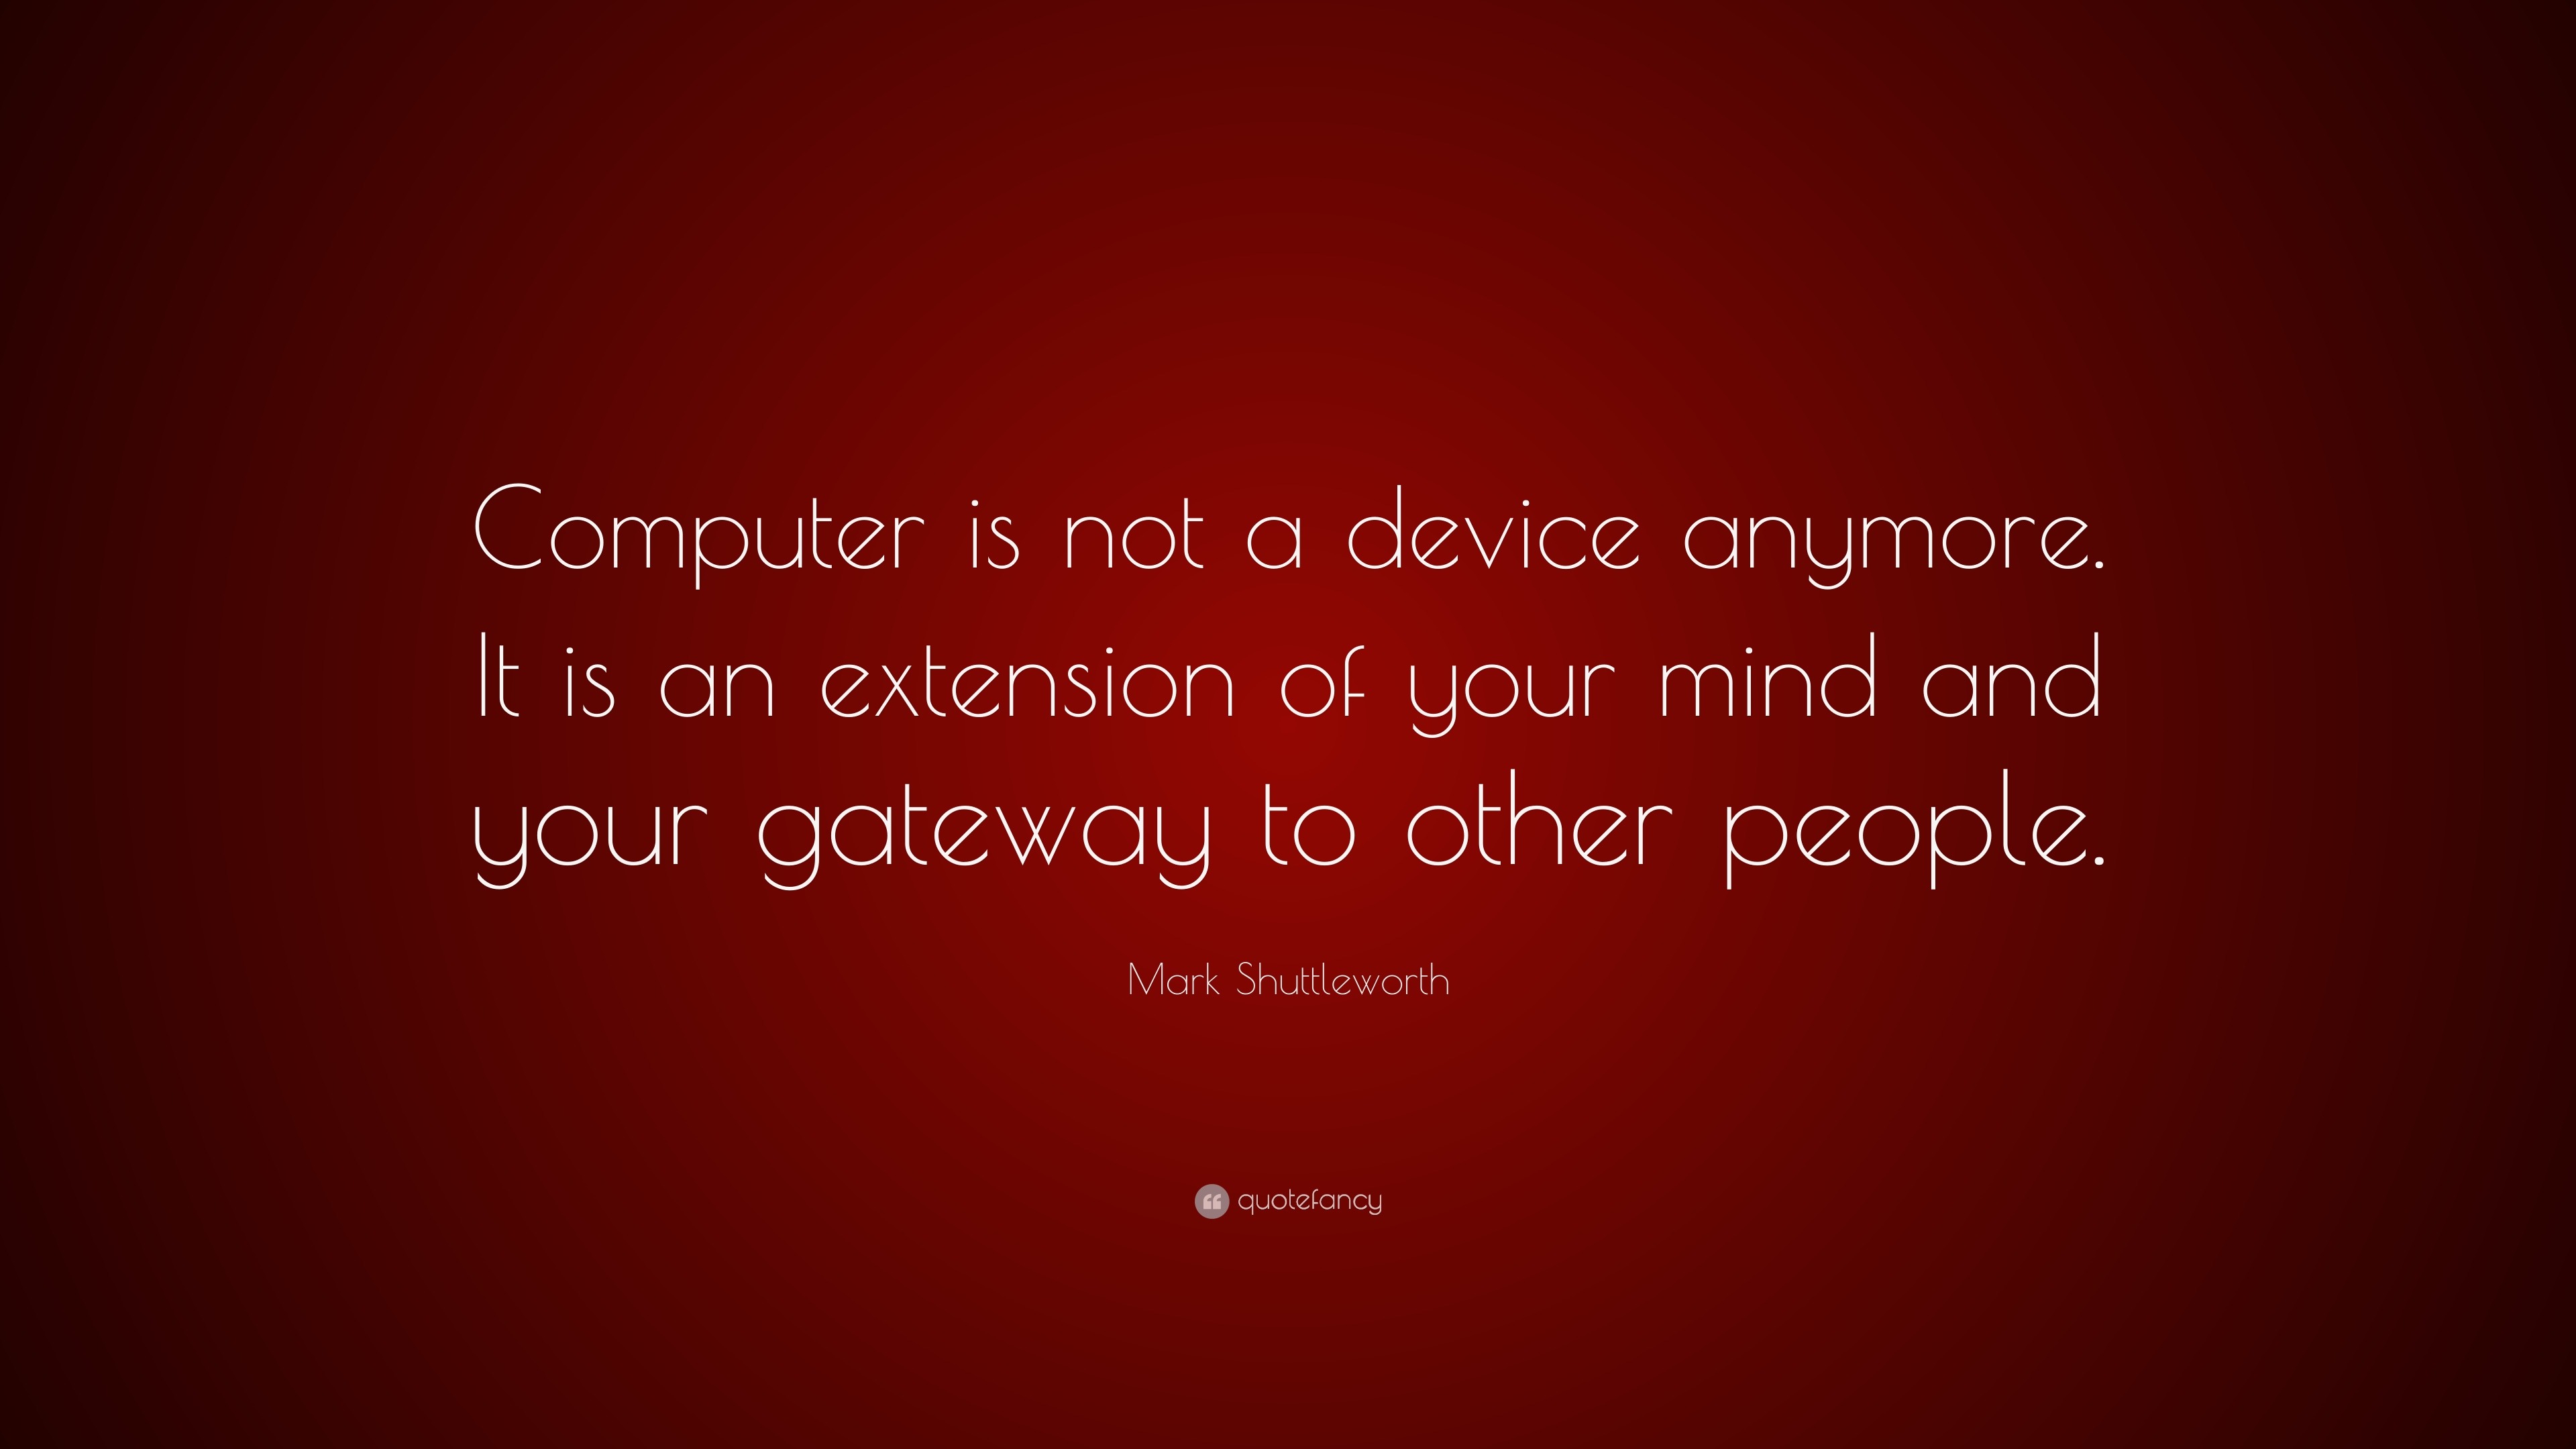 Mark Shuttleworth Quote: “Computer is not a device anymore. It is an  extension of your mind